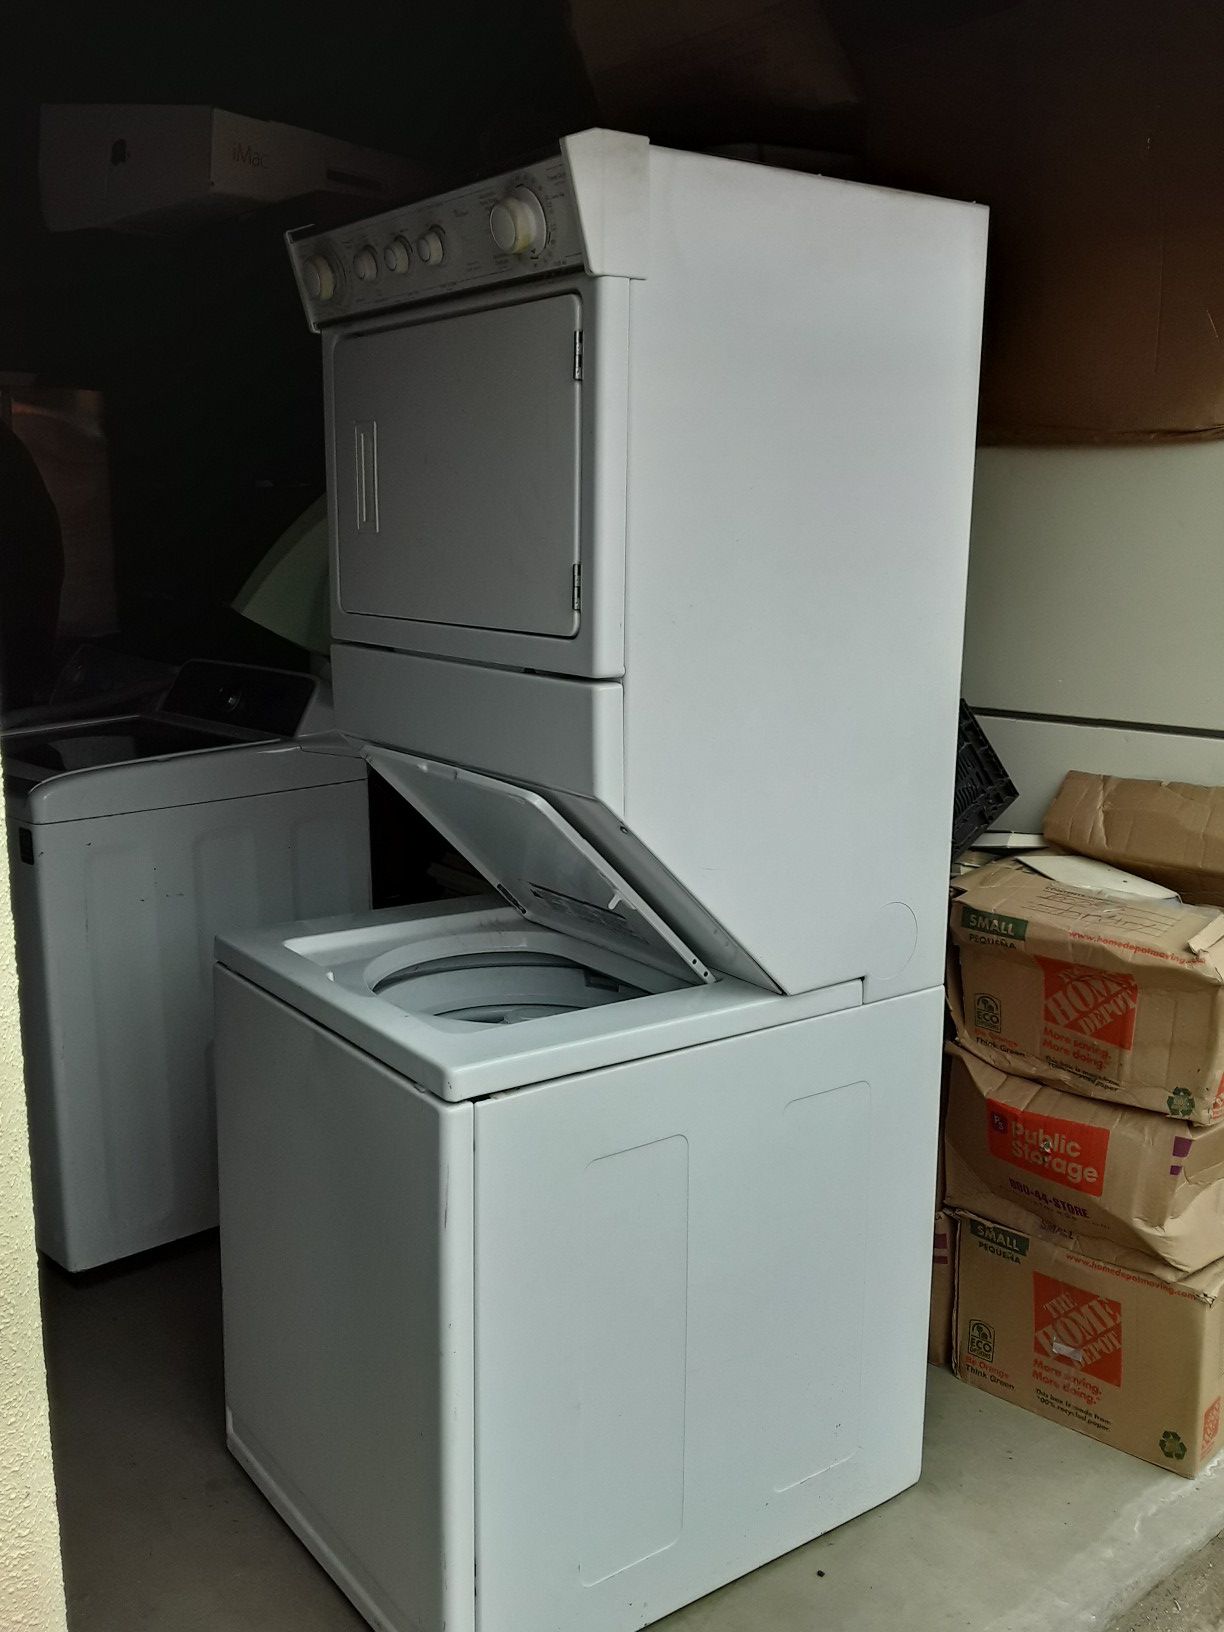 Full size stackable washer and dryer it is in my storage works good I need to get rid of the storage